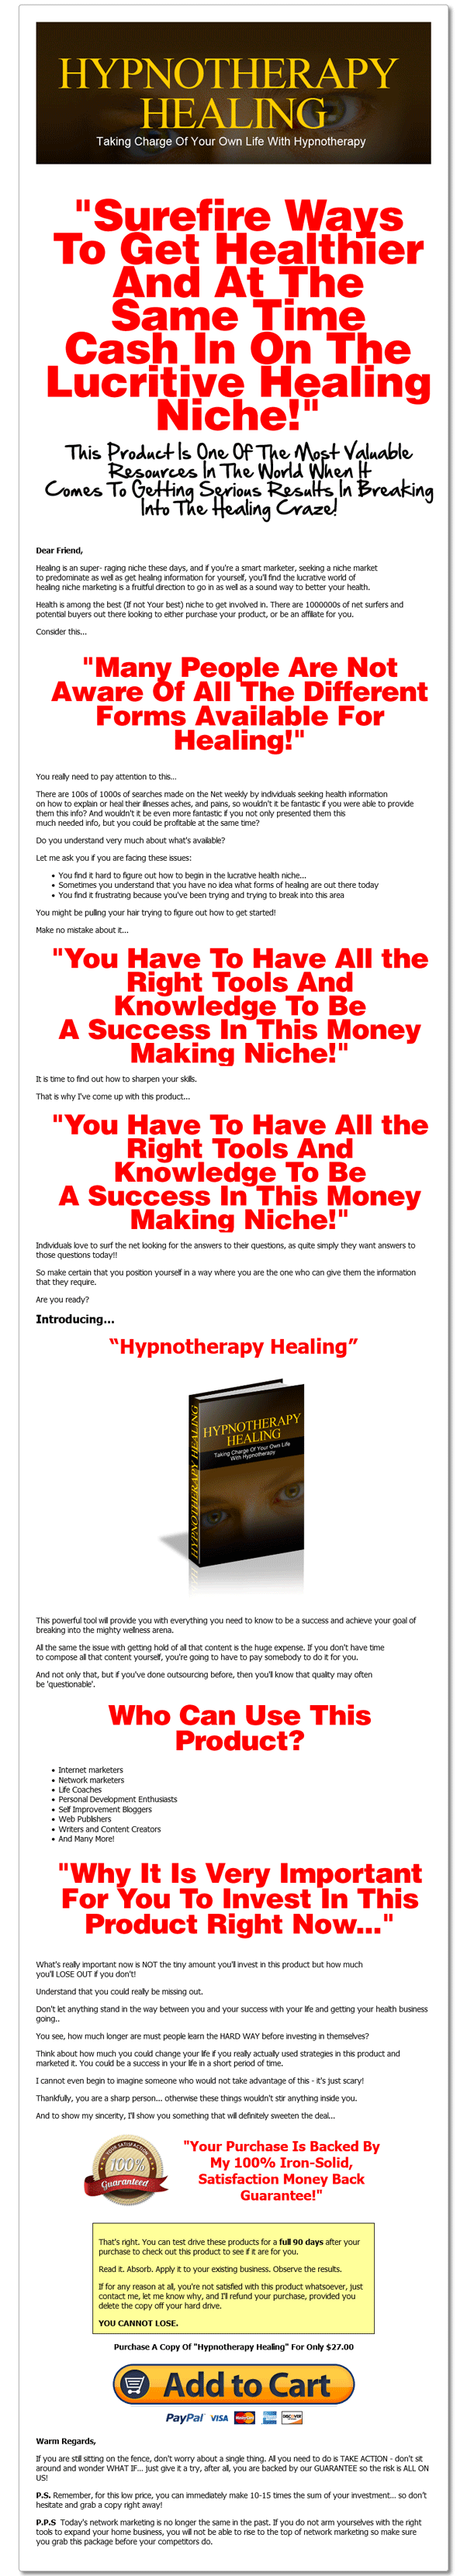 Hypnotherapy Healing Master Resell Rights Sales Page